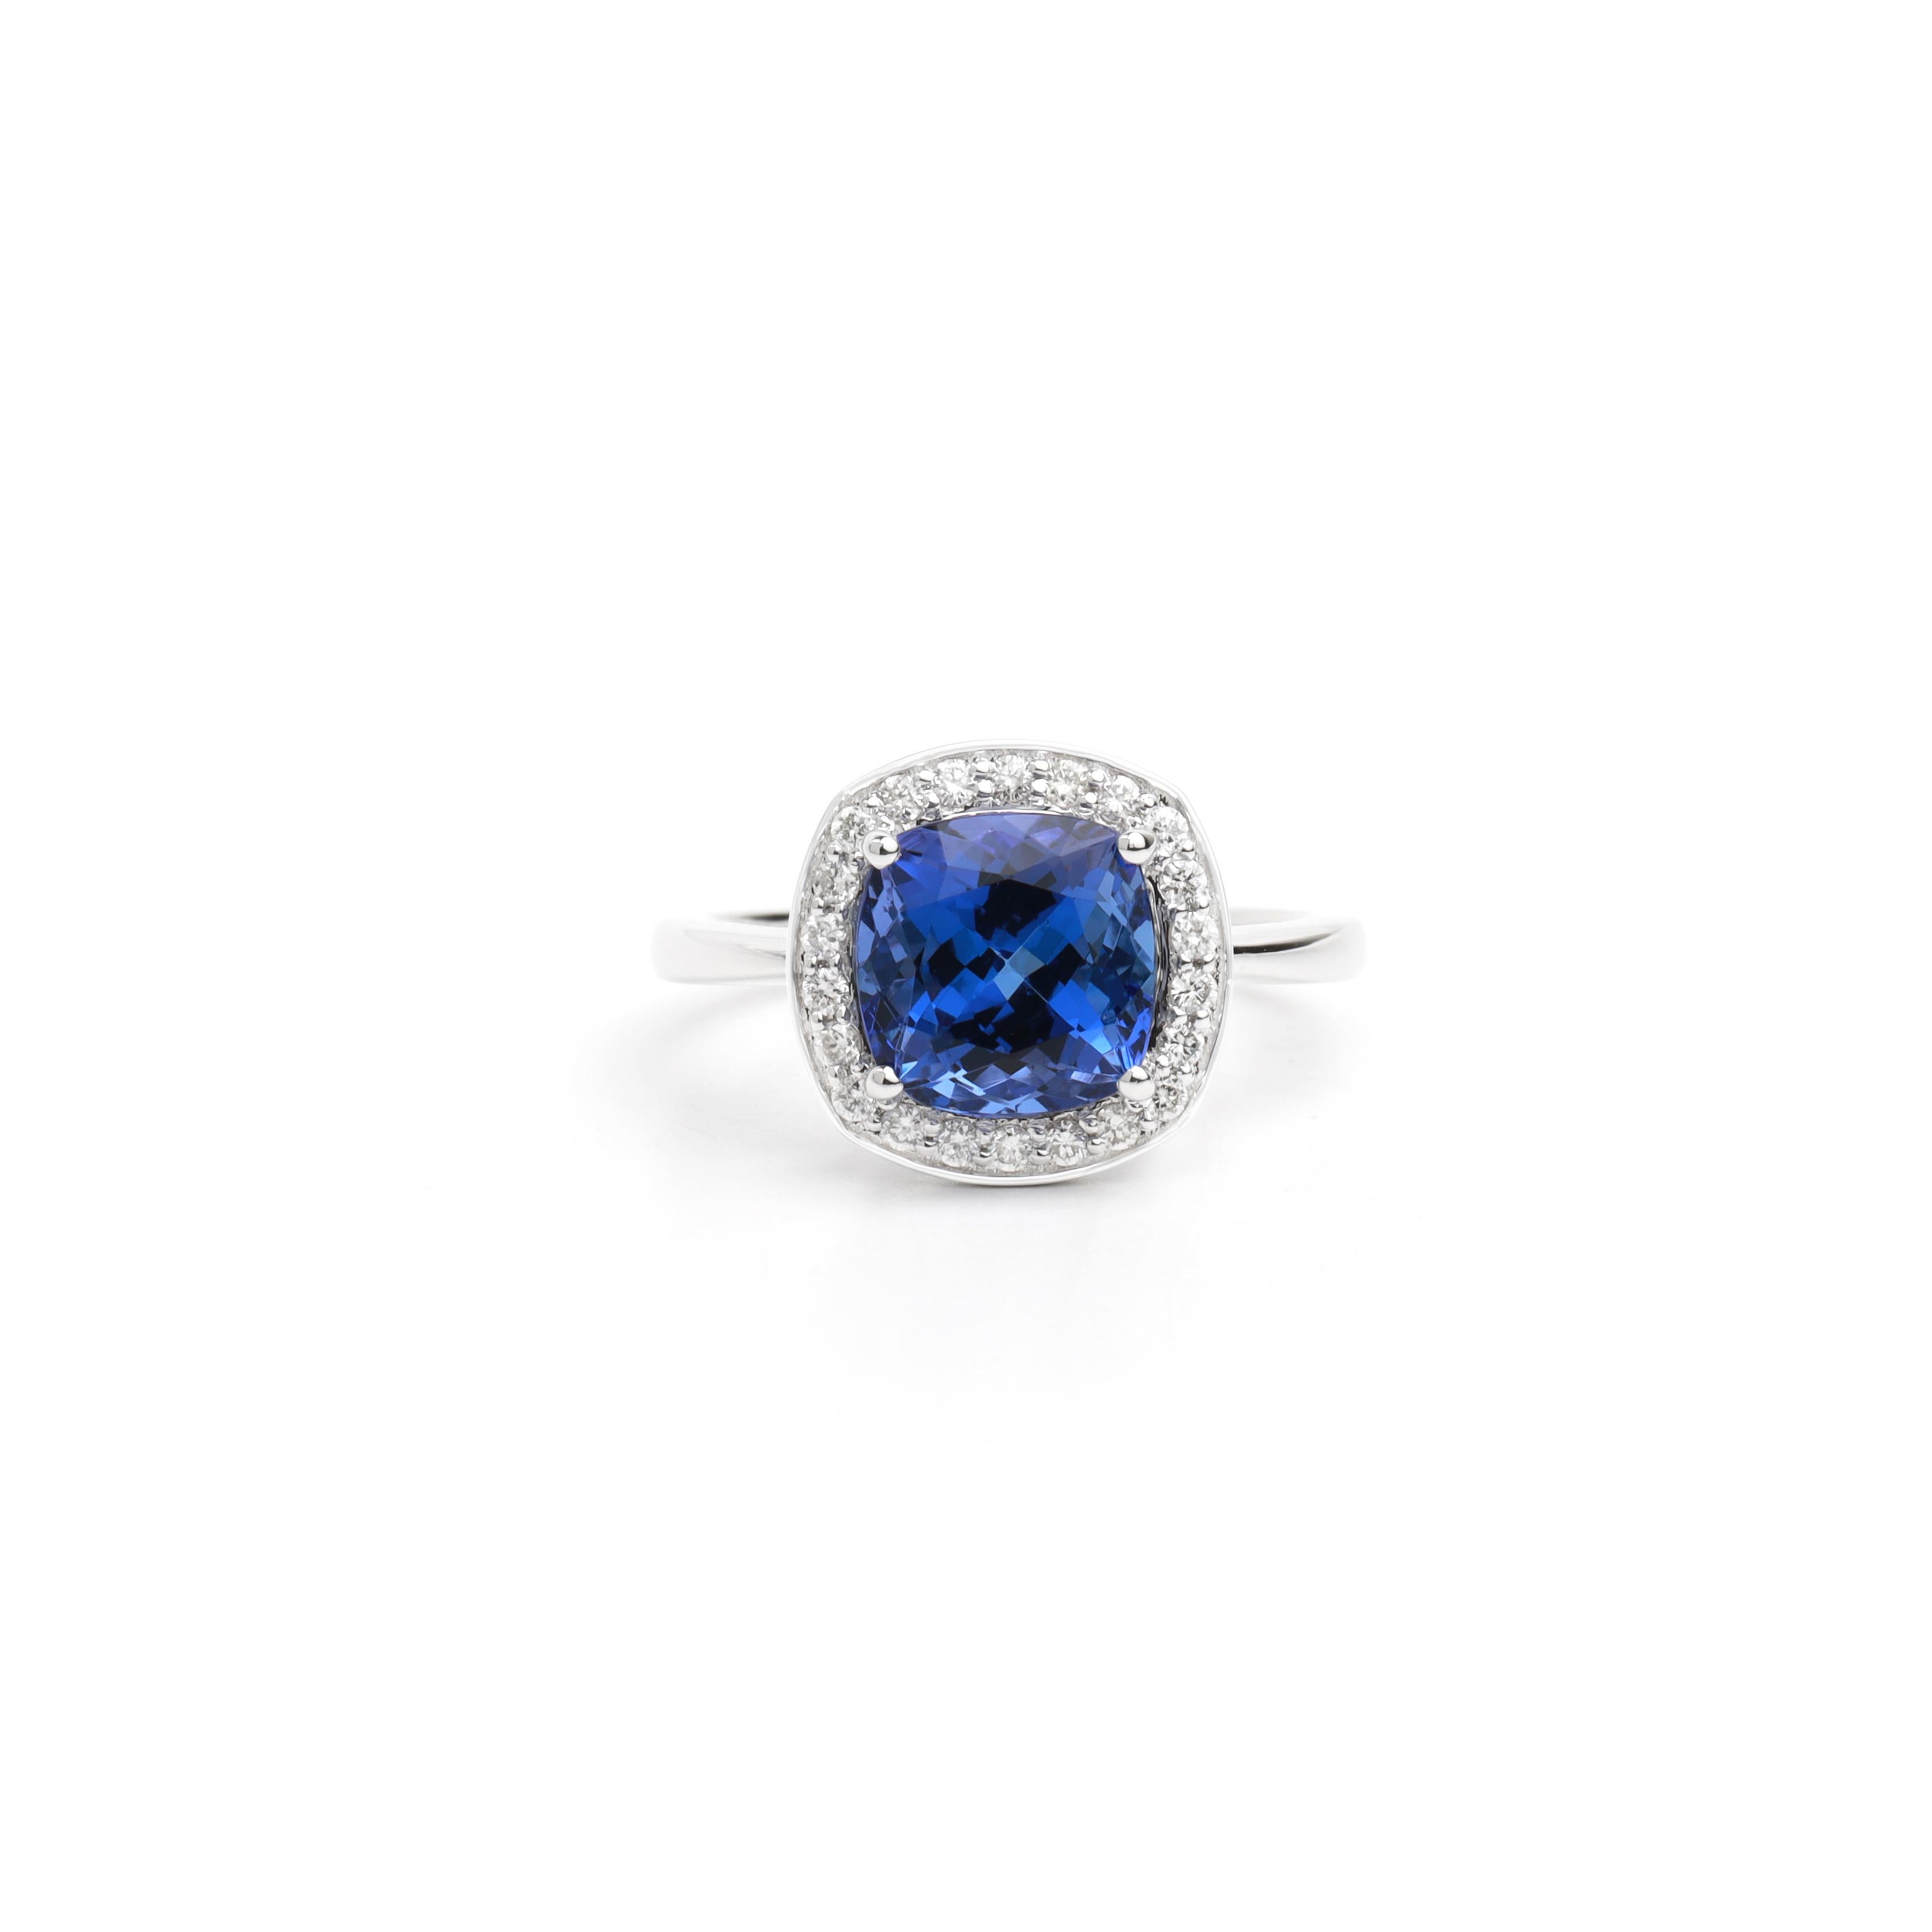 3.5 Carat Natural AAA Tanzanite Diamond Halo Cocktail Engagement Ring 18k Gold

Available in 18k white gold.

Same design can be made also with other custom gemstones per request.

Product details:

- Solid gold

- Diamond - approx. 1.3mm E VS

-